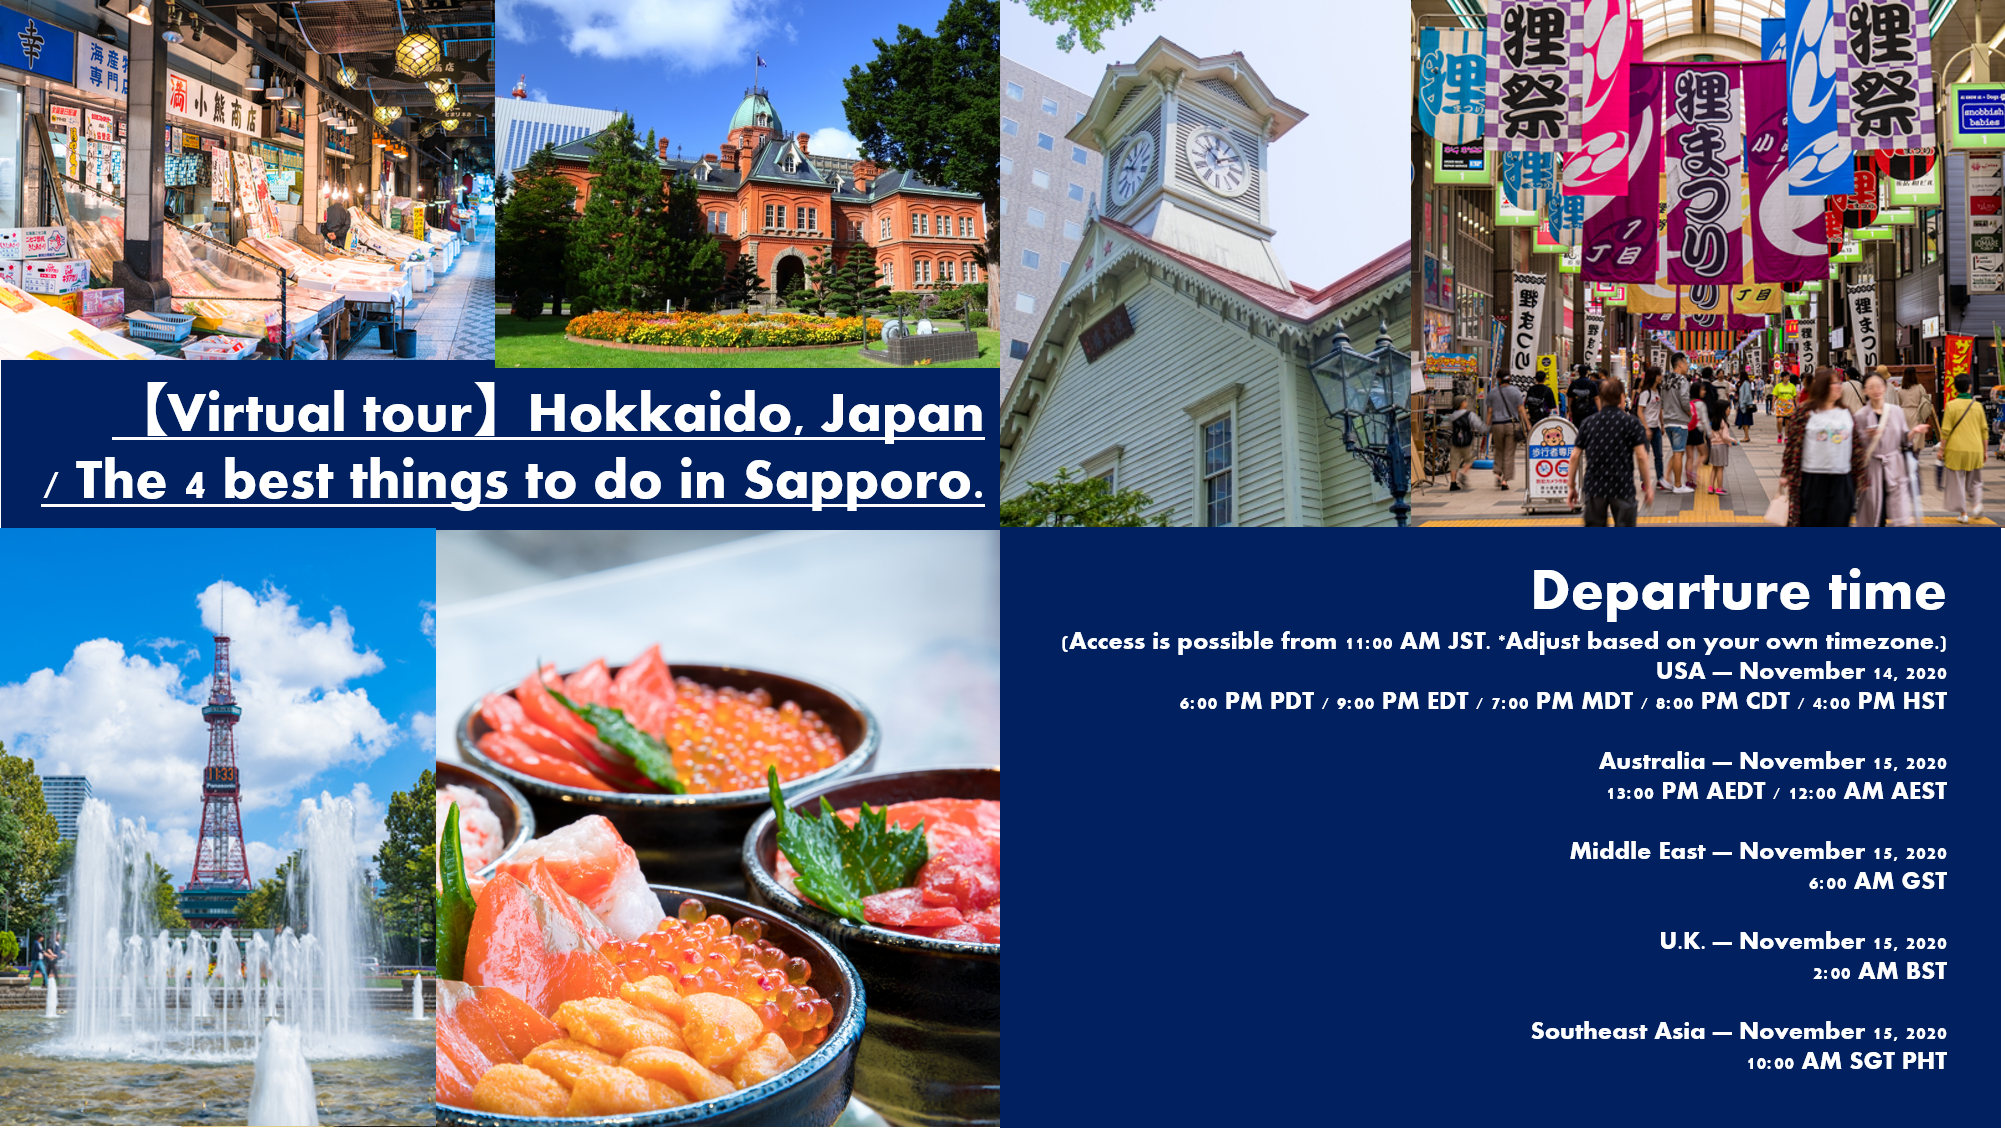 Hokkaido , Japan / The 4 best things to do in Sapporo.